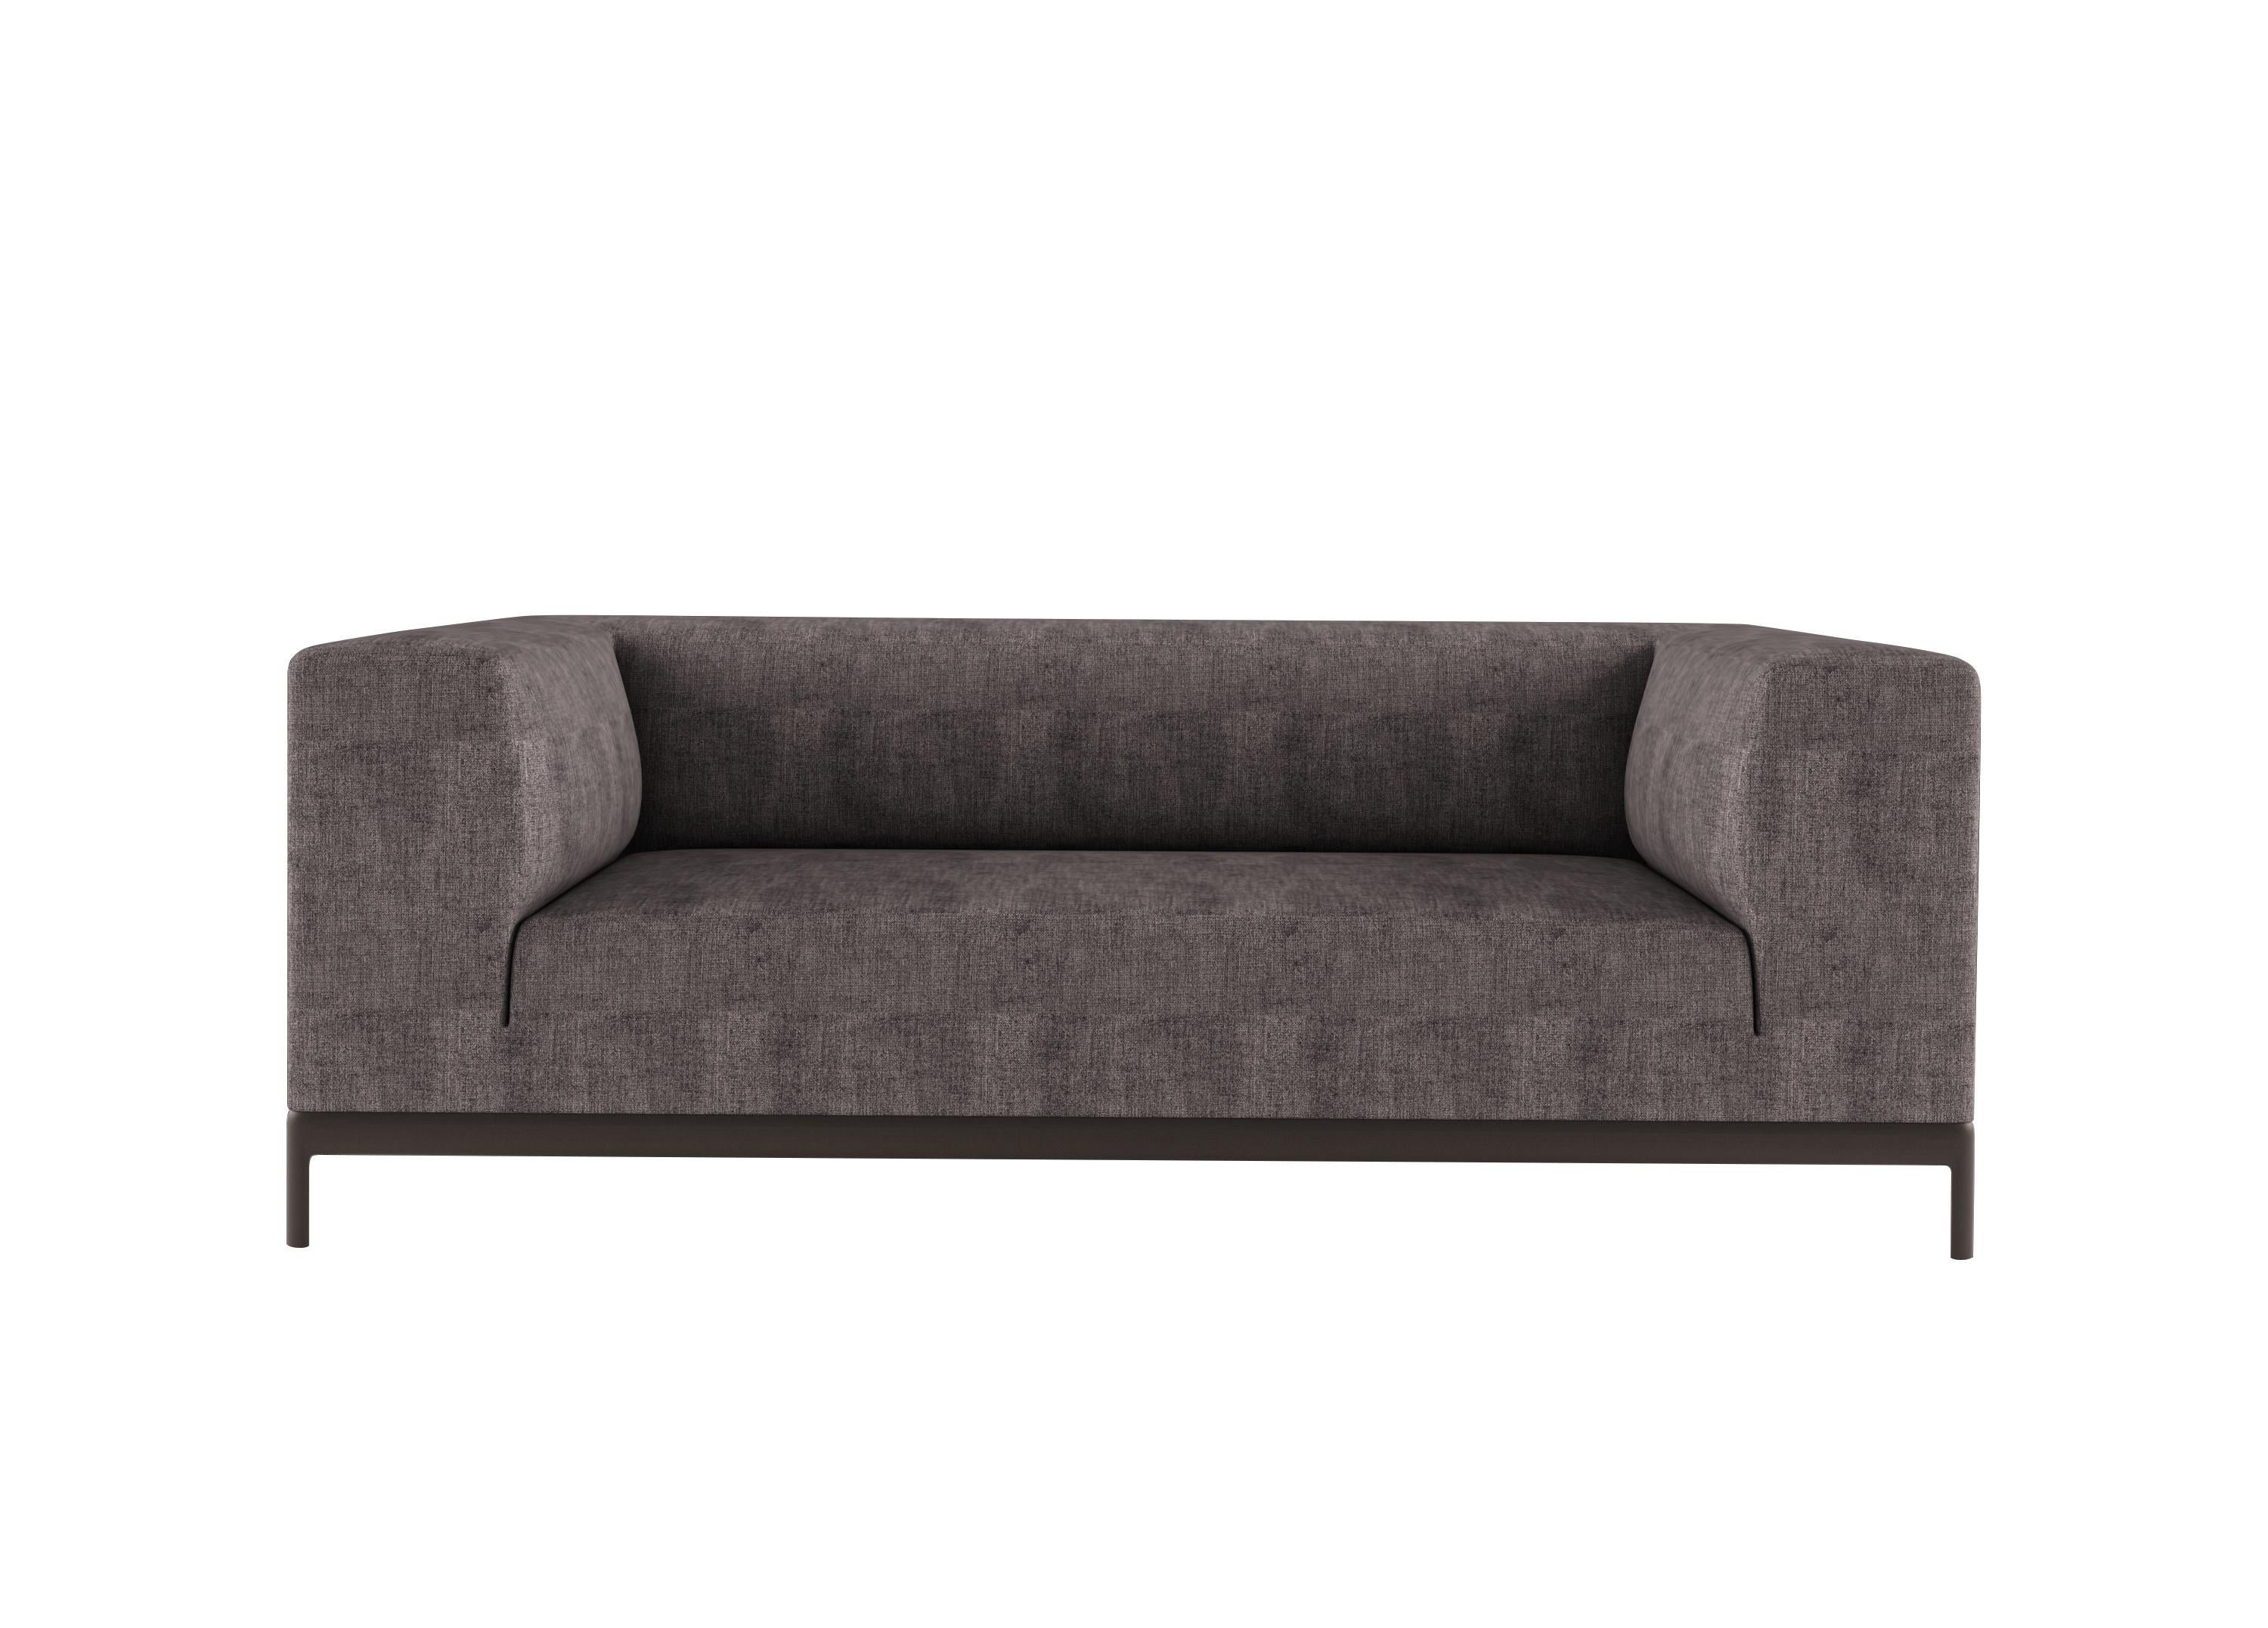 Alias P32 AluZen Soft Sofa 2 Seater with Upholstery and Lacquered Aluminum Frame by Ludovica+Roberto Palomba

Two-seater sofa with structure in lacquered or polished aluminium.Seat, back and armrests with removable cover in fabric or